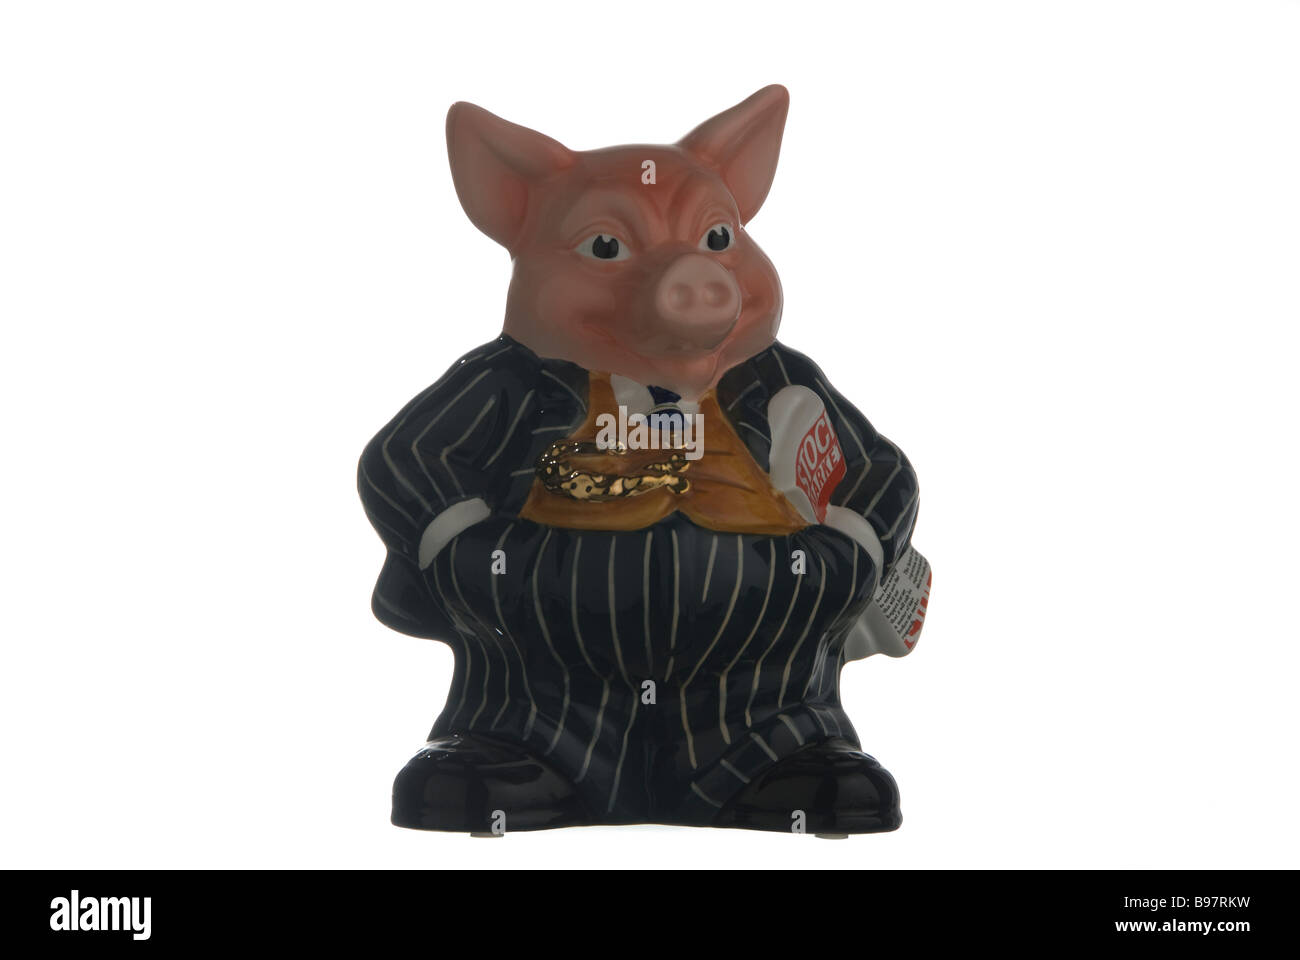 Pig shaped Piggy Bank in City pinstripe suit Stock Photo